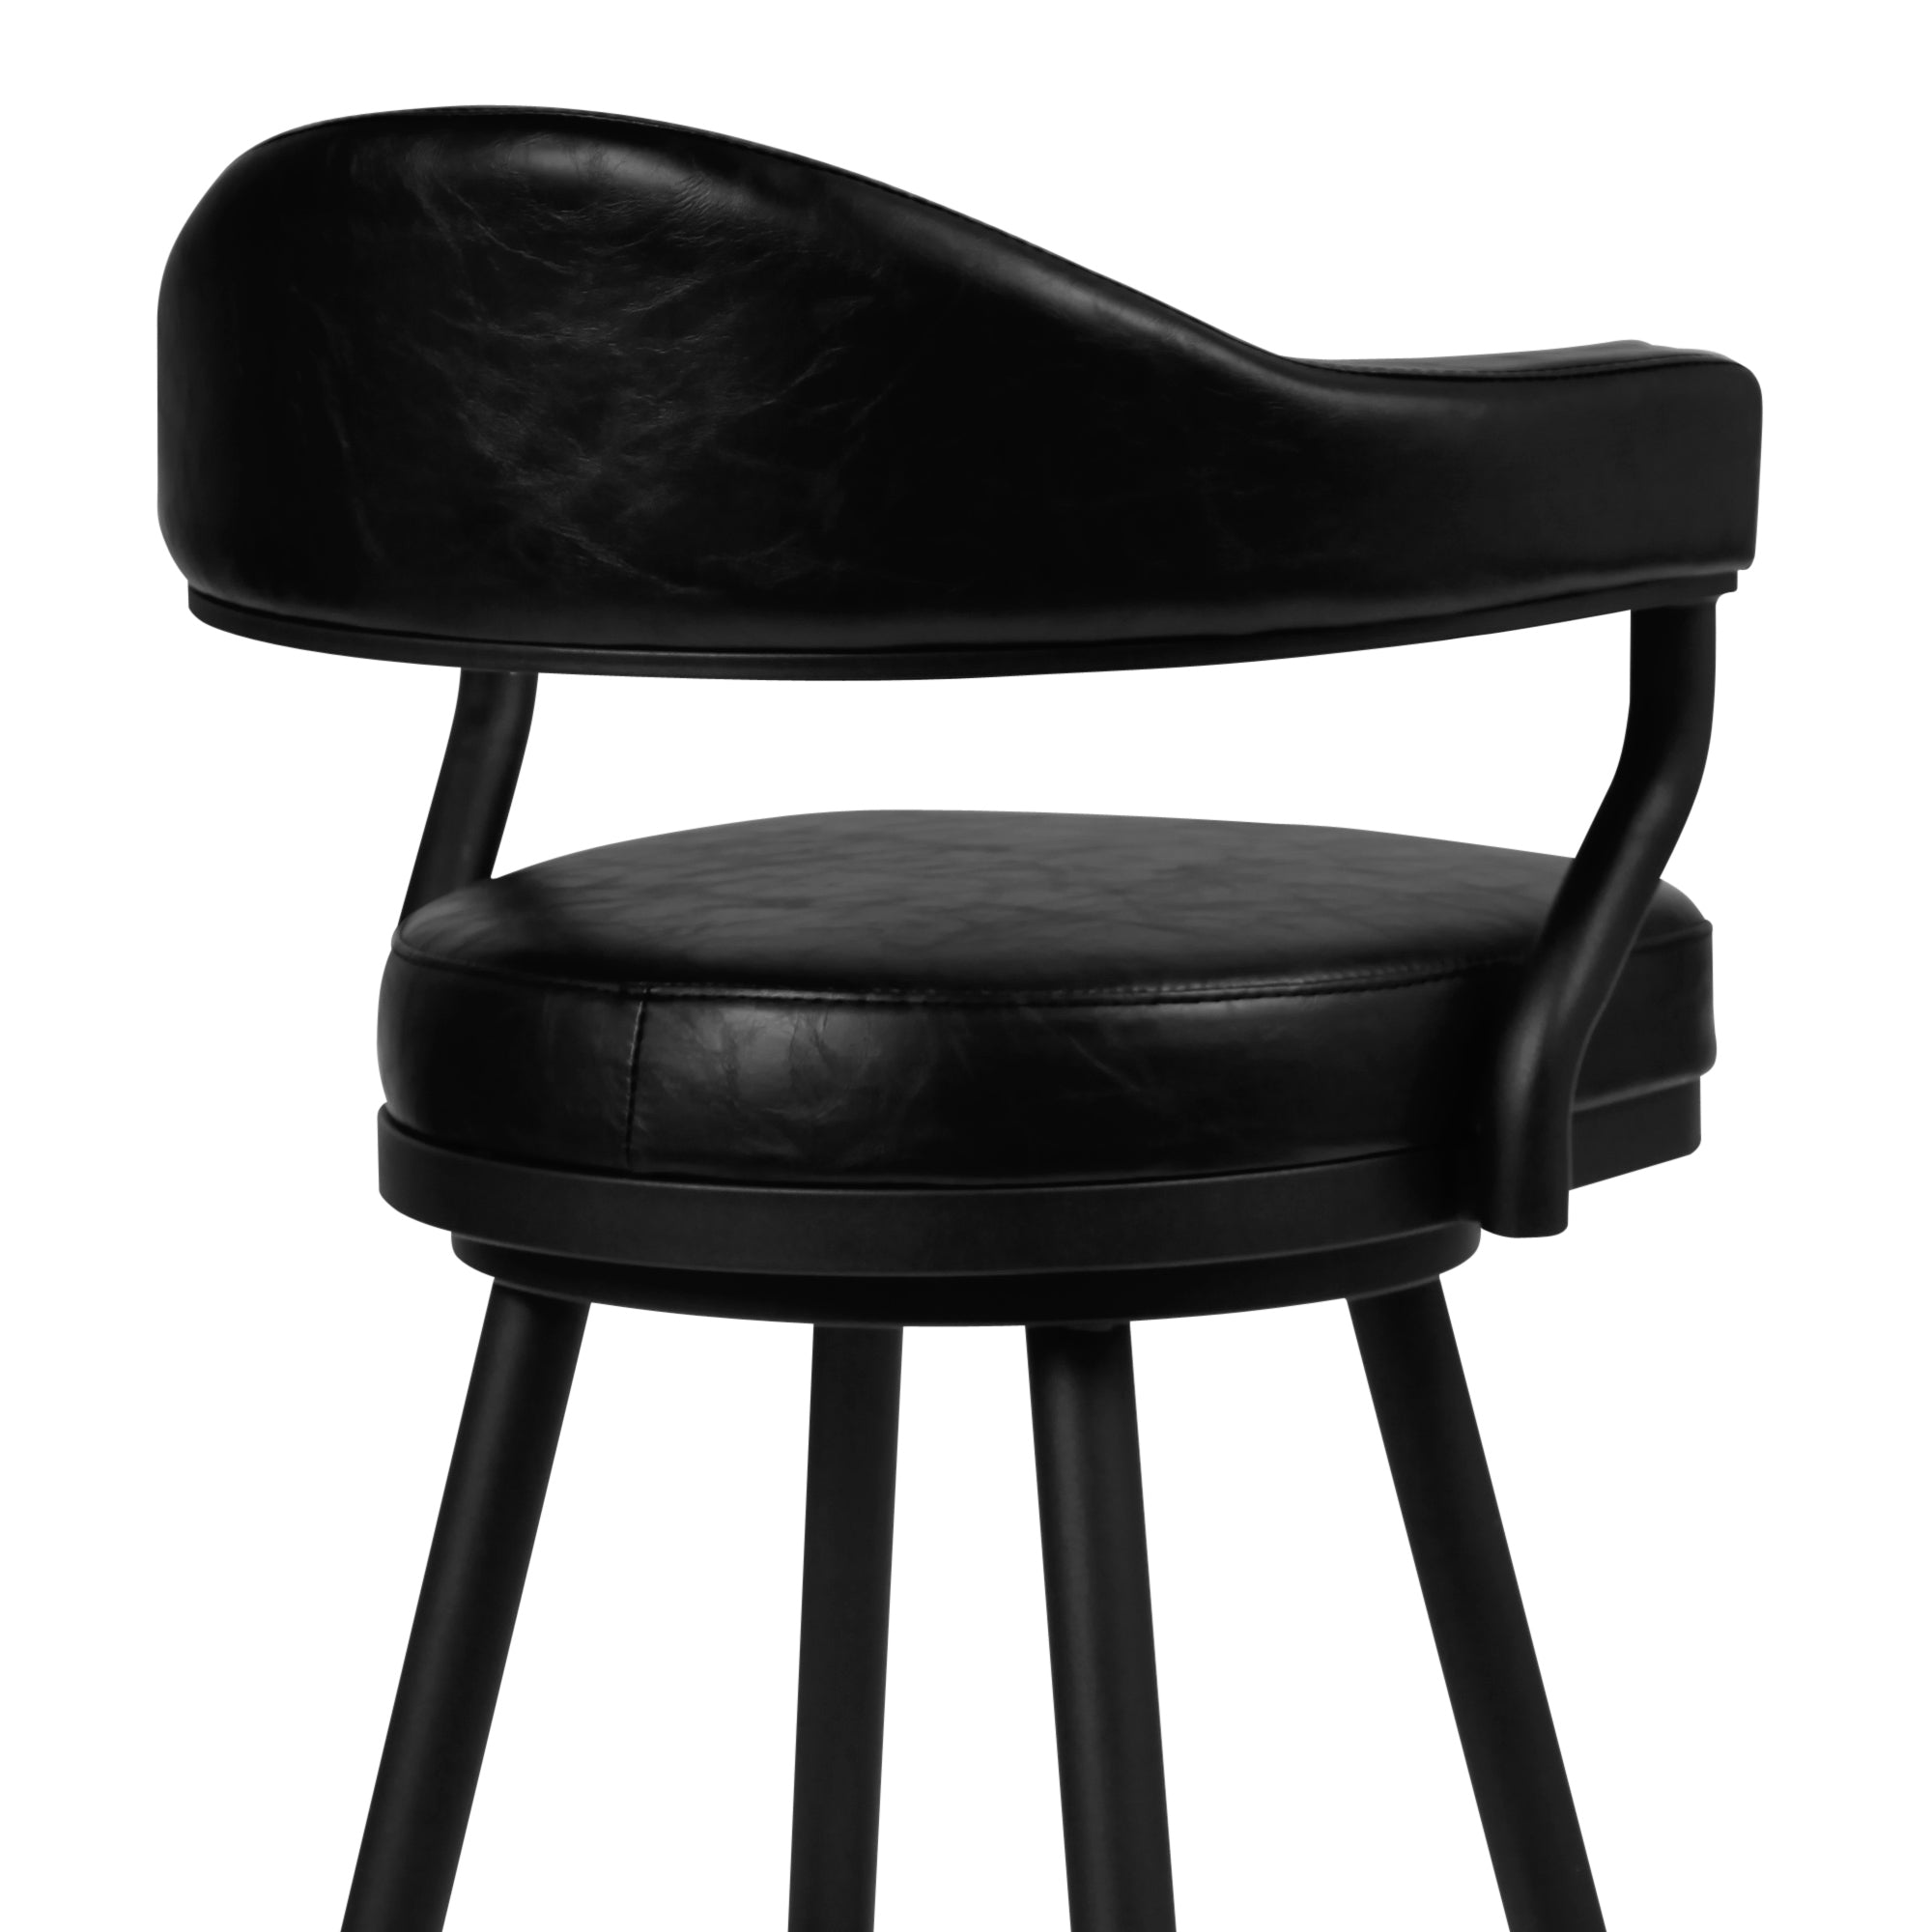 Justin Counter Stool or Barstool in a Black Powder Coated Finish and Vintage Black Faux Leather